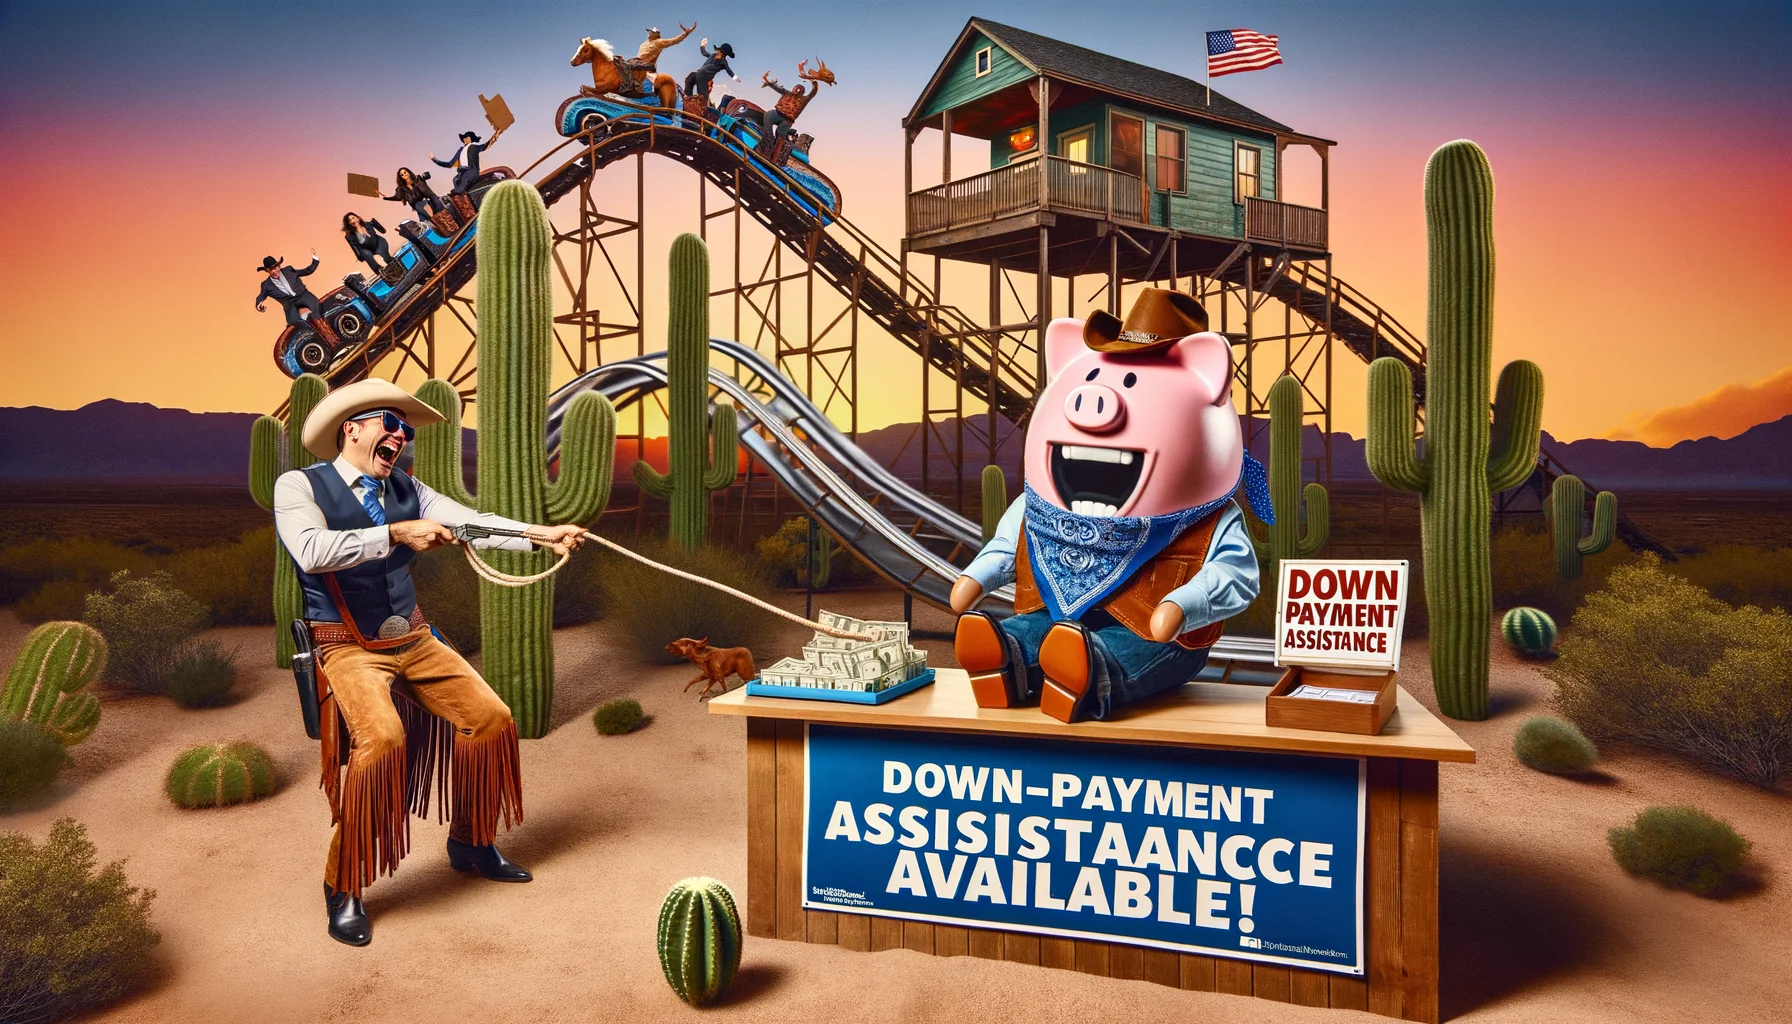 Create a humorous scene set in Texas that symbolizes down-payment assistance programs in a fun and satirical manner. Image may include a cowboy-dressed piggy bank laughing hysterically as it rides a roller-coaster symbolizing the housing market. Nearby, an individual dressed as a realtor, holding a sign saying 'Down-payment assistance available!' tries to rope the piggy bank in. The surroundings are typical of Texas, with cacti and tumbleweed around, amidst a vibrant sunset.